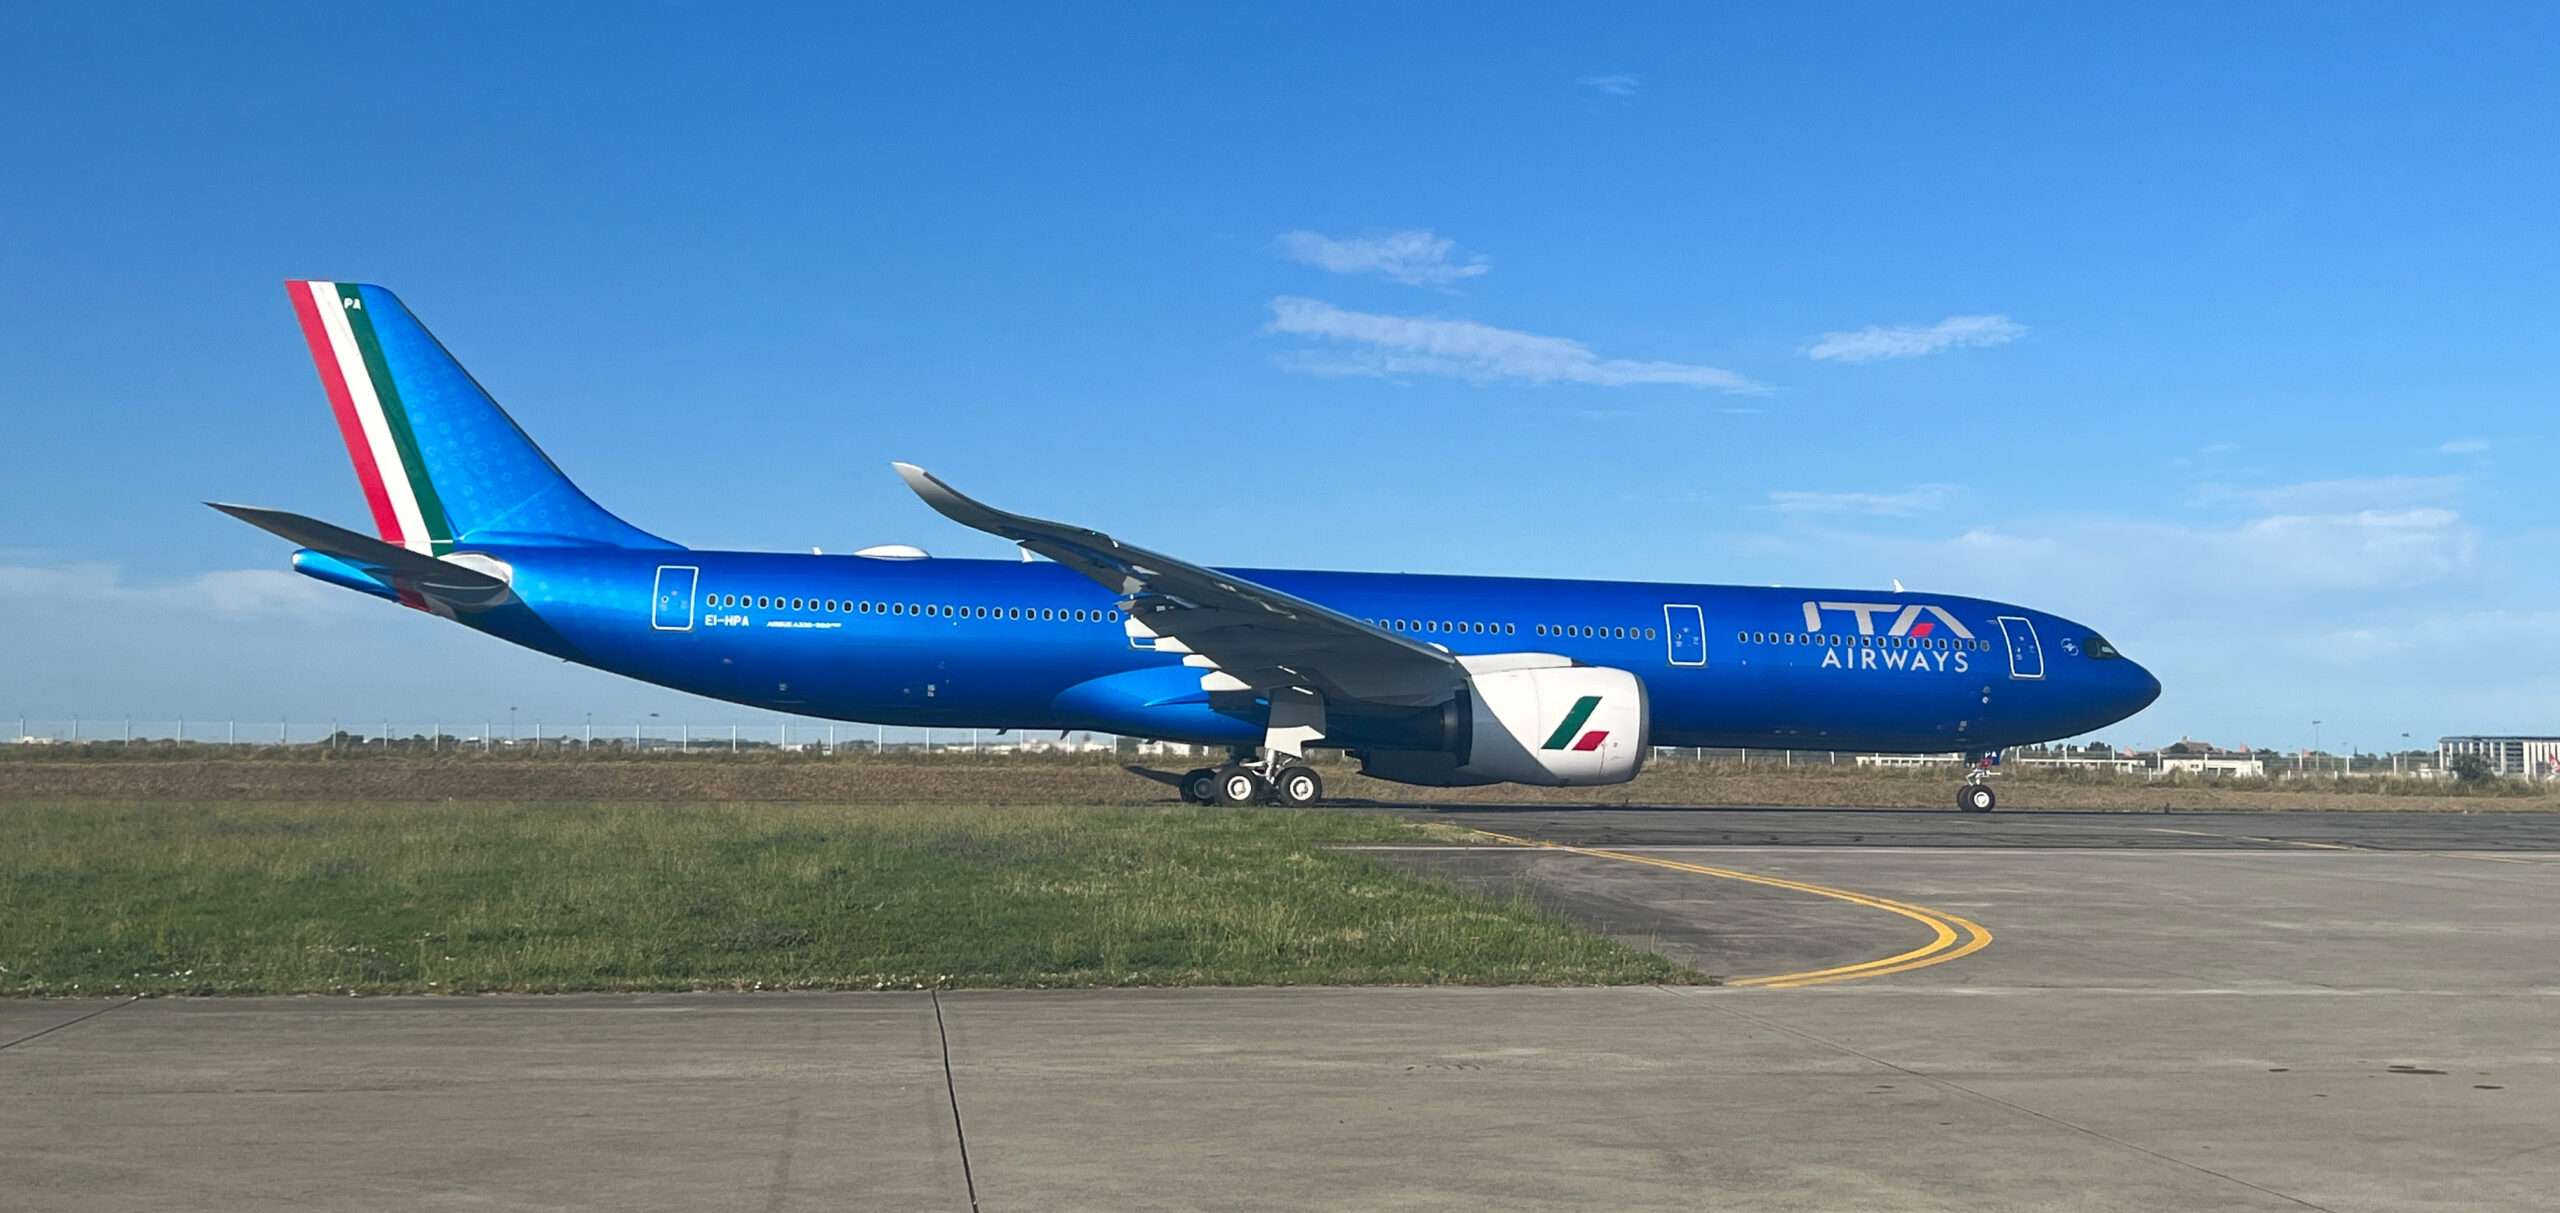 AerCap Celebrates First of Two A330neo Deliveries to ITA